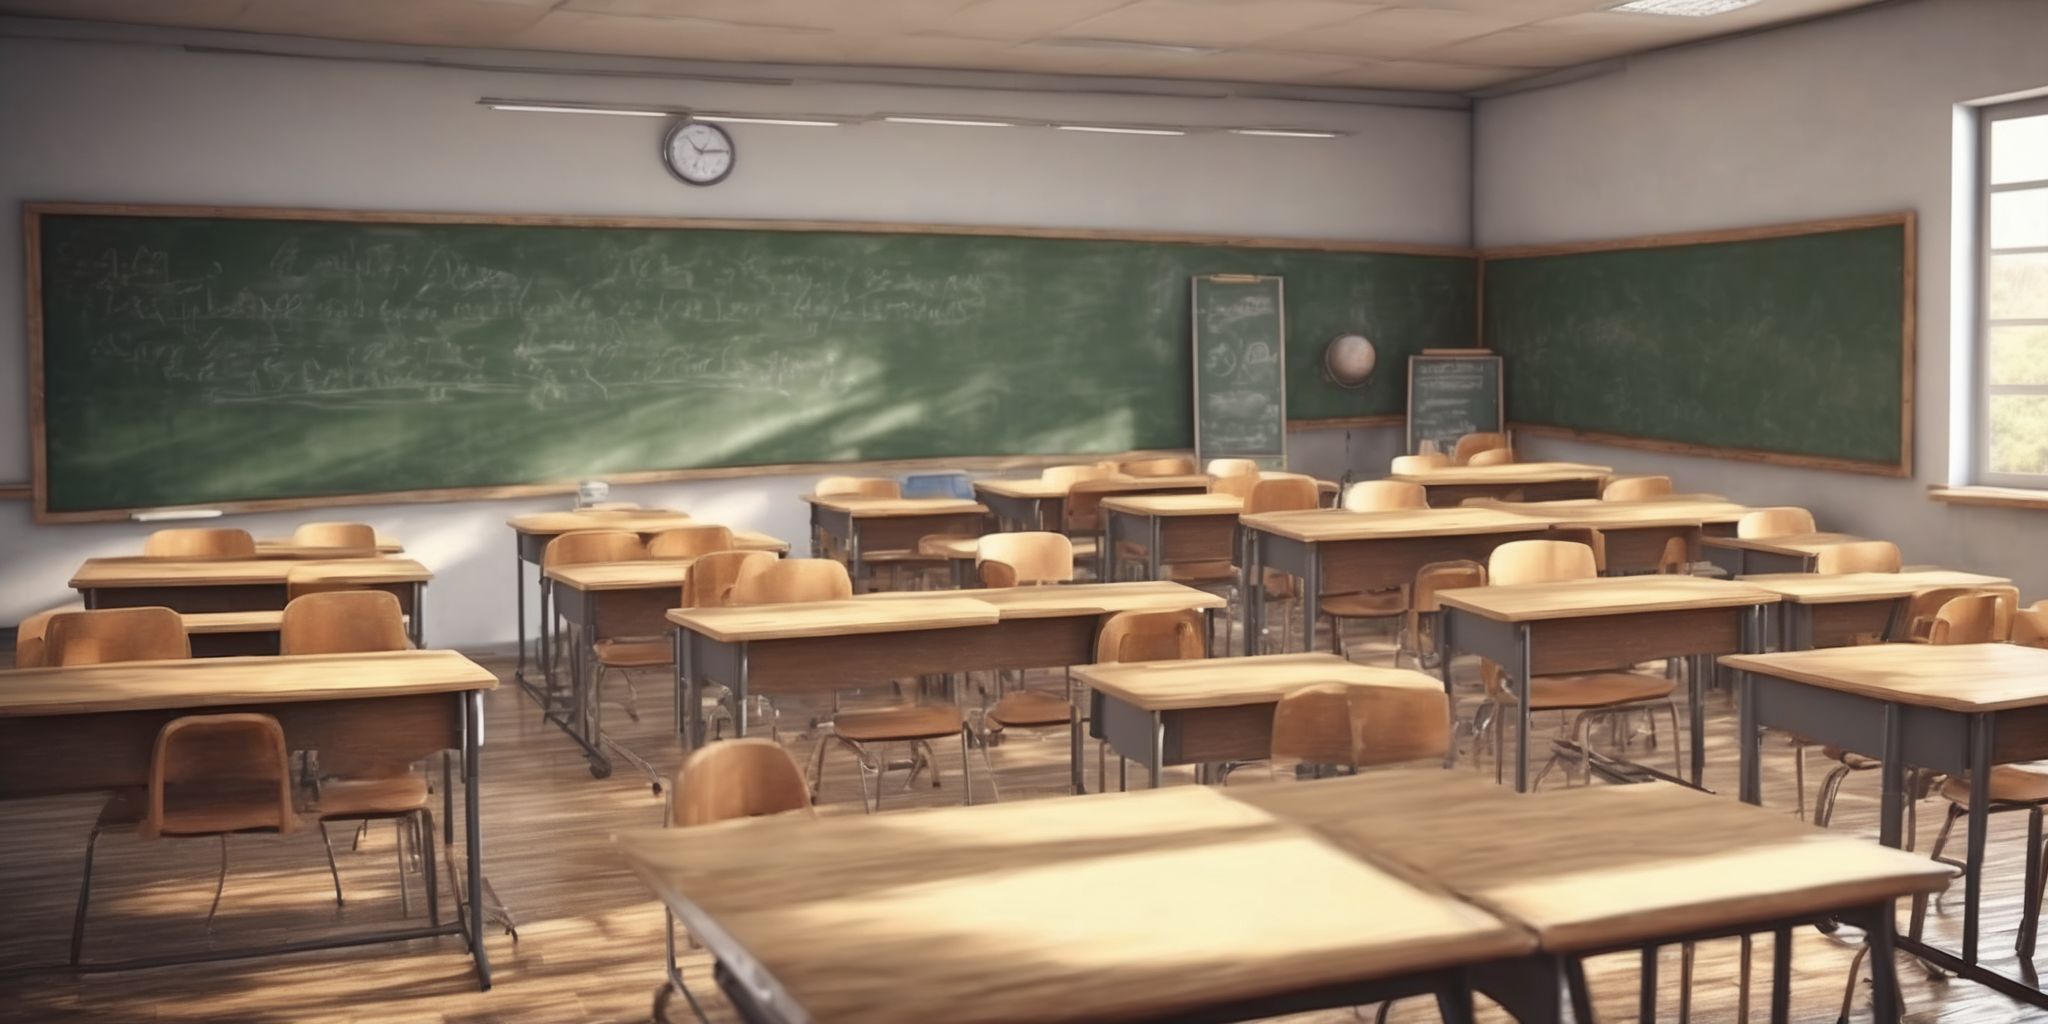 Classroom  in realistic, photographic style